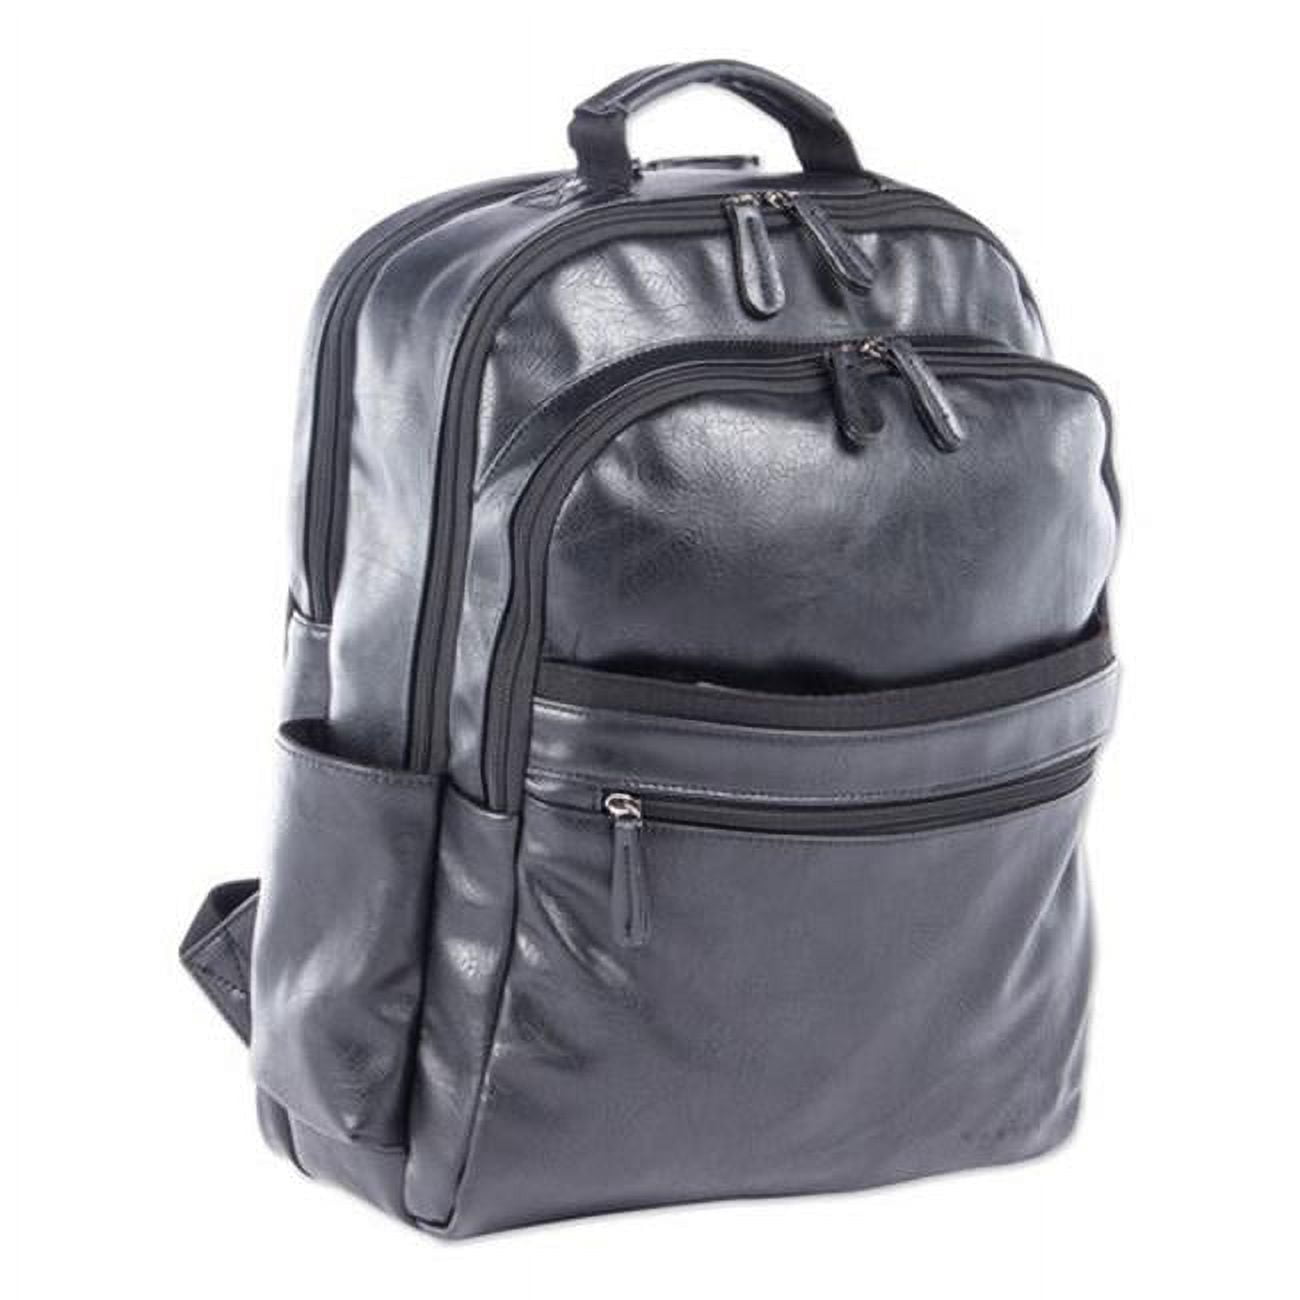 The Bugatti Group® Valais Backpack, Holds Lptops 15.6, 5.5 x 5.5 x  16.5, Black 